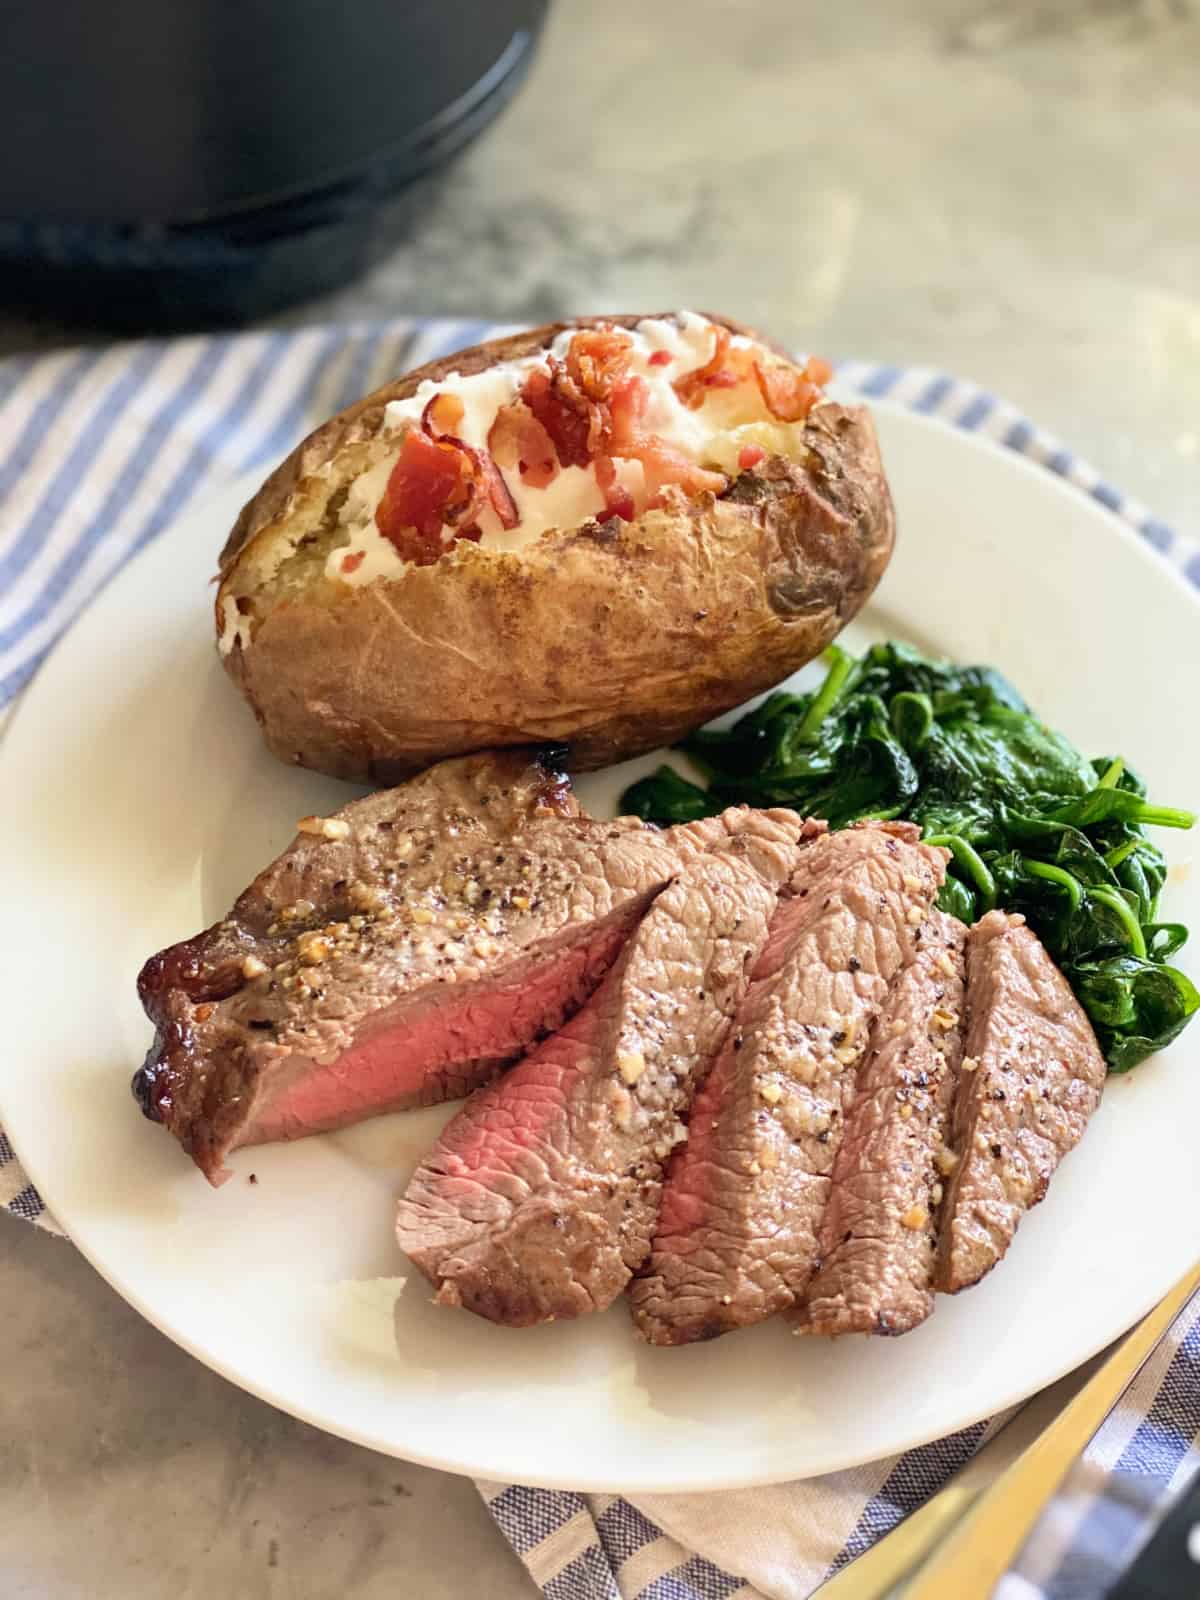 Sliced steak with baked potato and spinach on a white plate and blue and white cloth next to it.